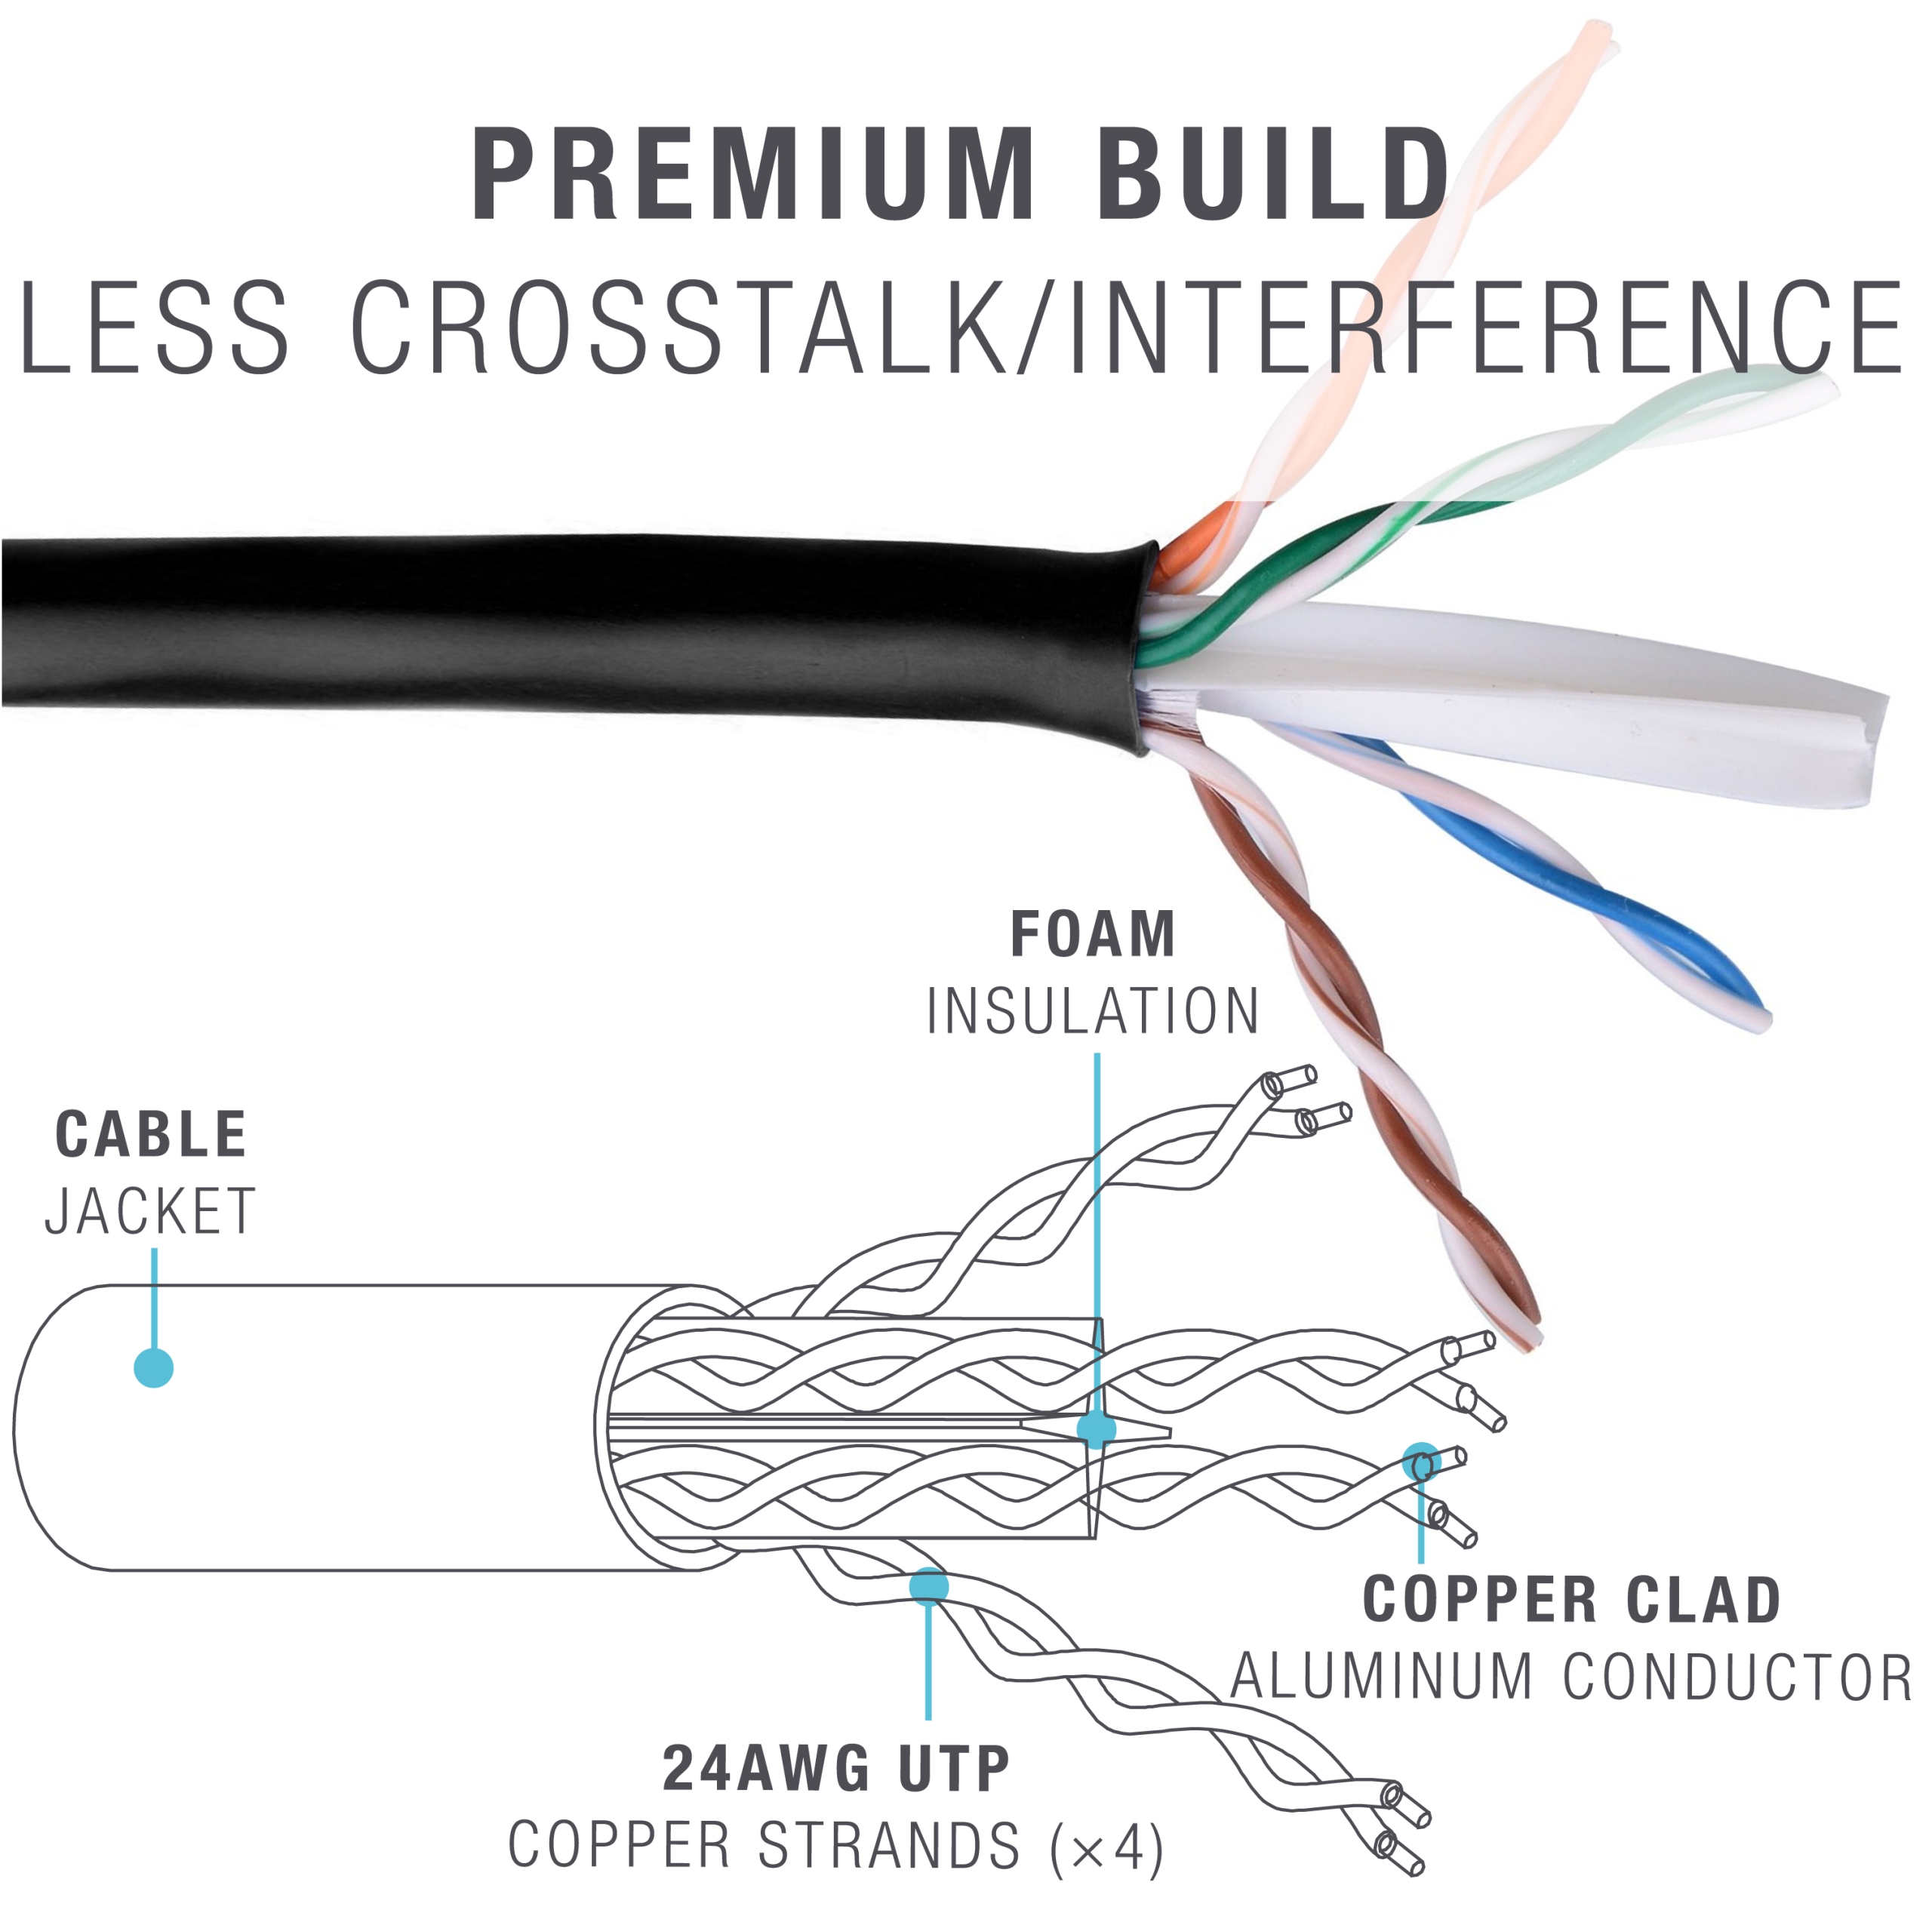 Mediabridge™ Ethernet Cable (50 Feet) - Supports Cat6 / Cat5e / Cat5  Standards, 550MHz, 10Gbps - RJ45 Computer Networking Cord (Part# 31-399-50X)